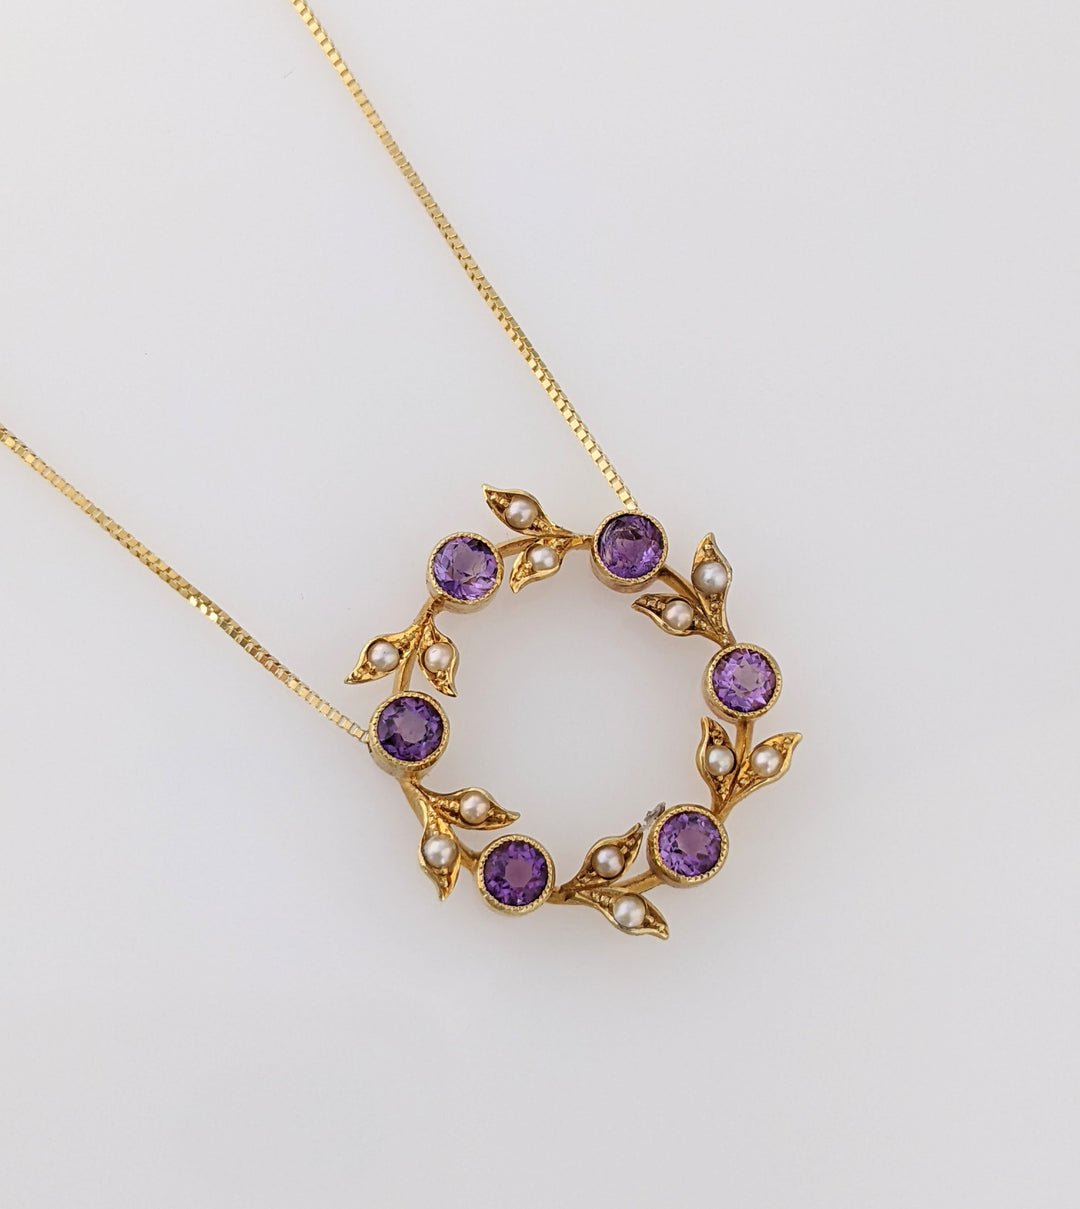 14K AMETHYST ROUND 4MM (6) WITH TWELVE 2MM PEARLS ESTATE PENDANT AND CHAIN 5.7 GRAMS